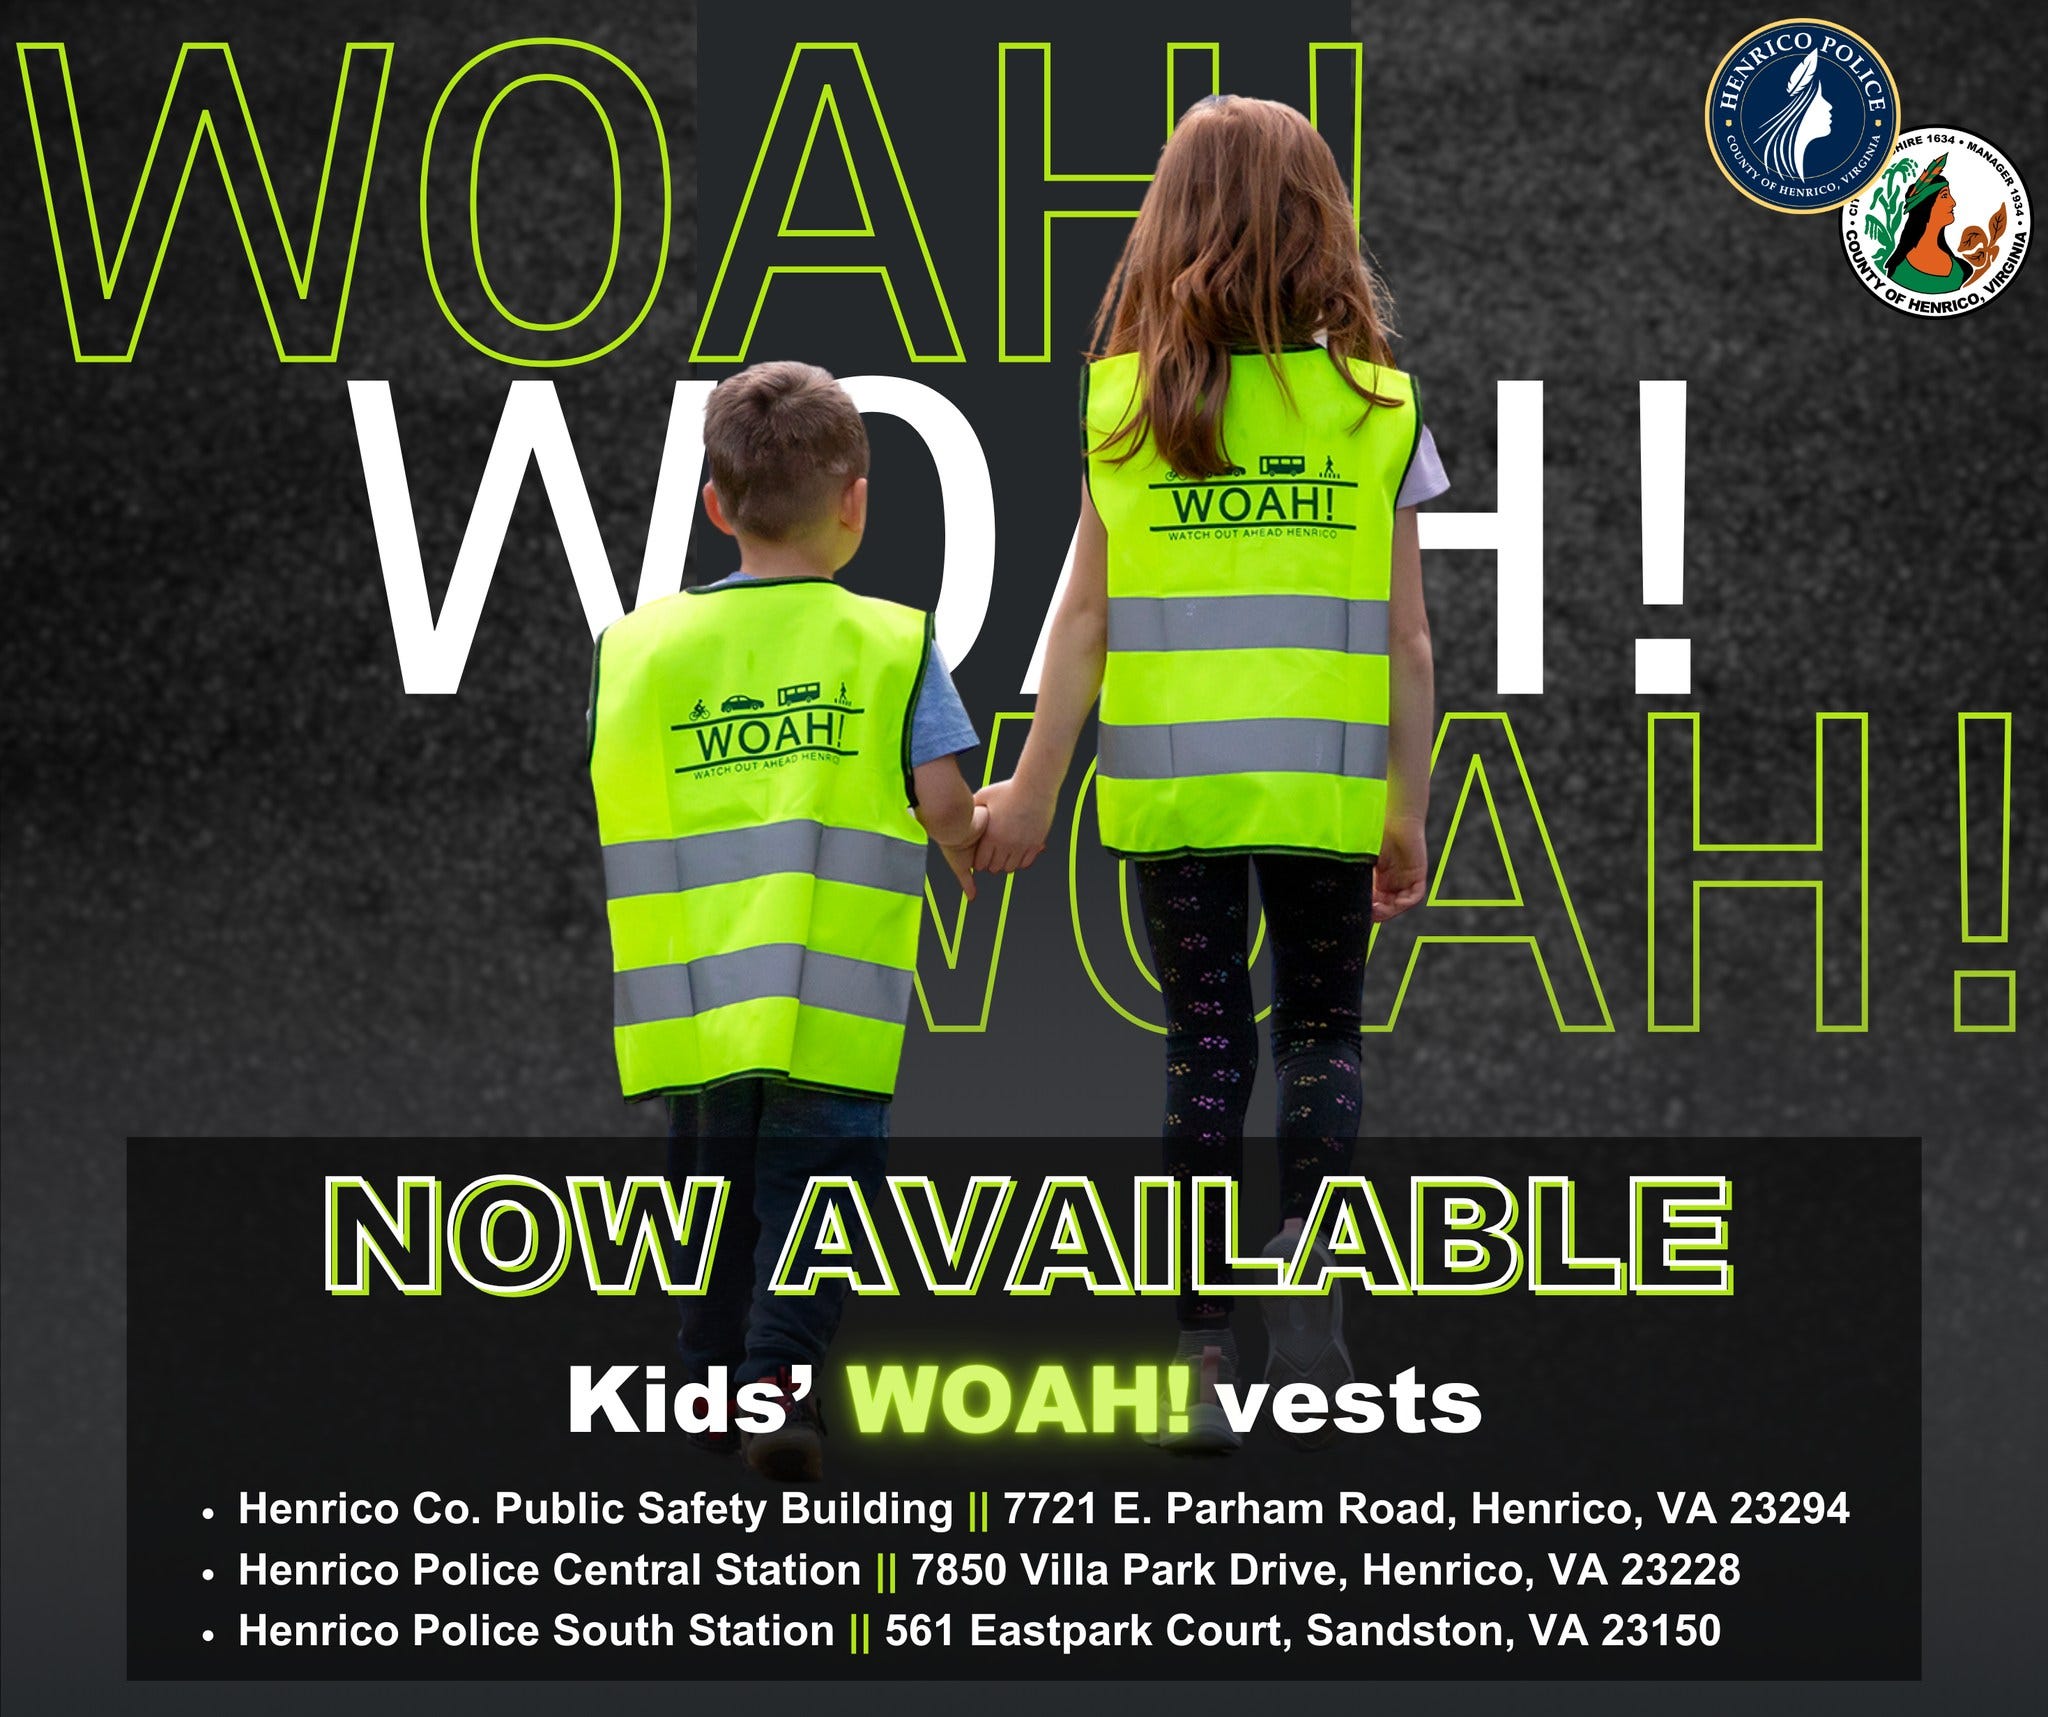 Free Child-Sized Reflective Vests Available in Henrico [Video]